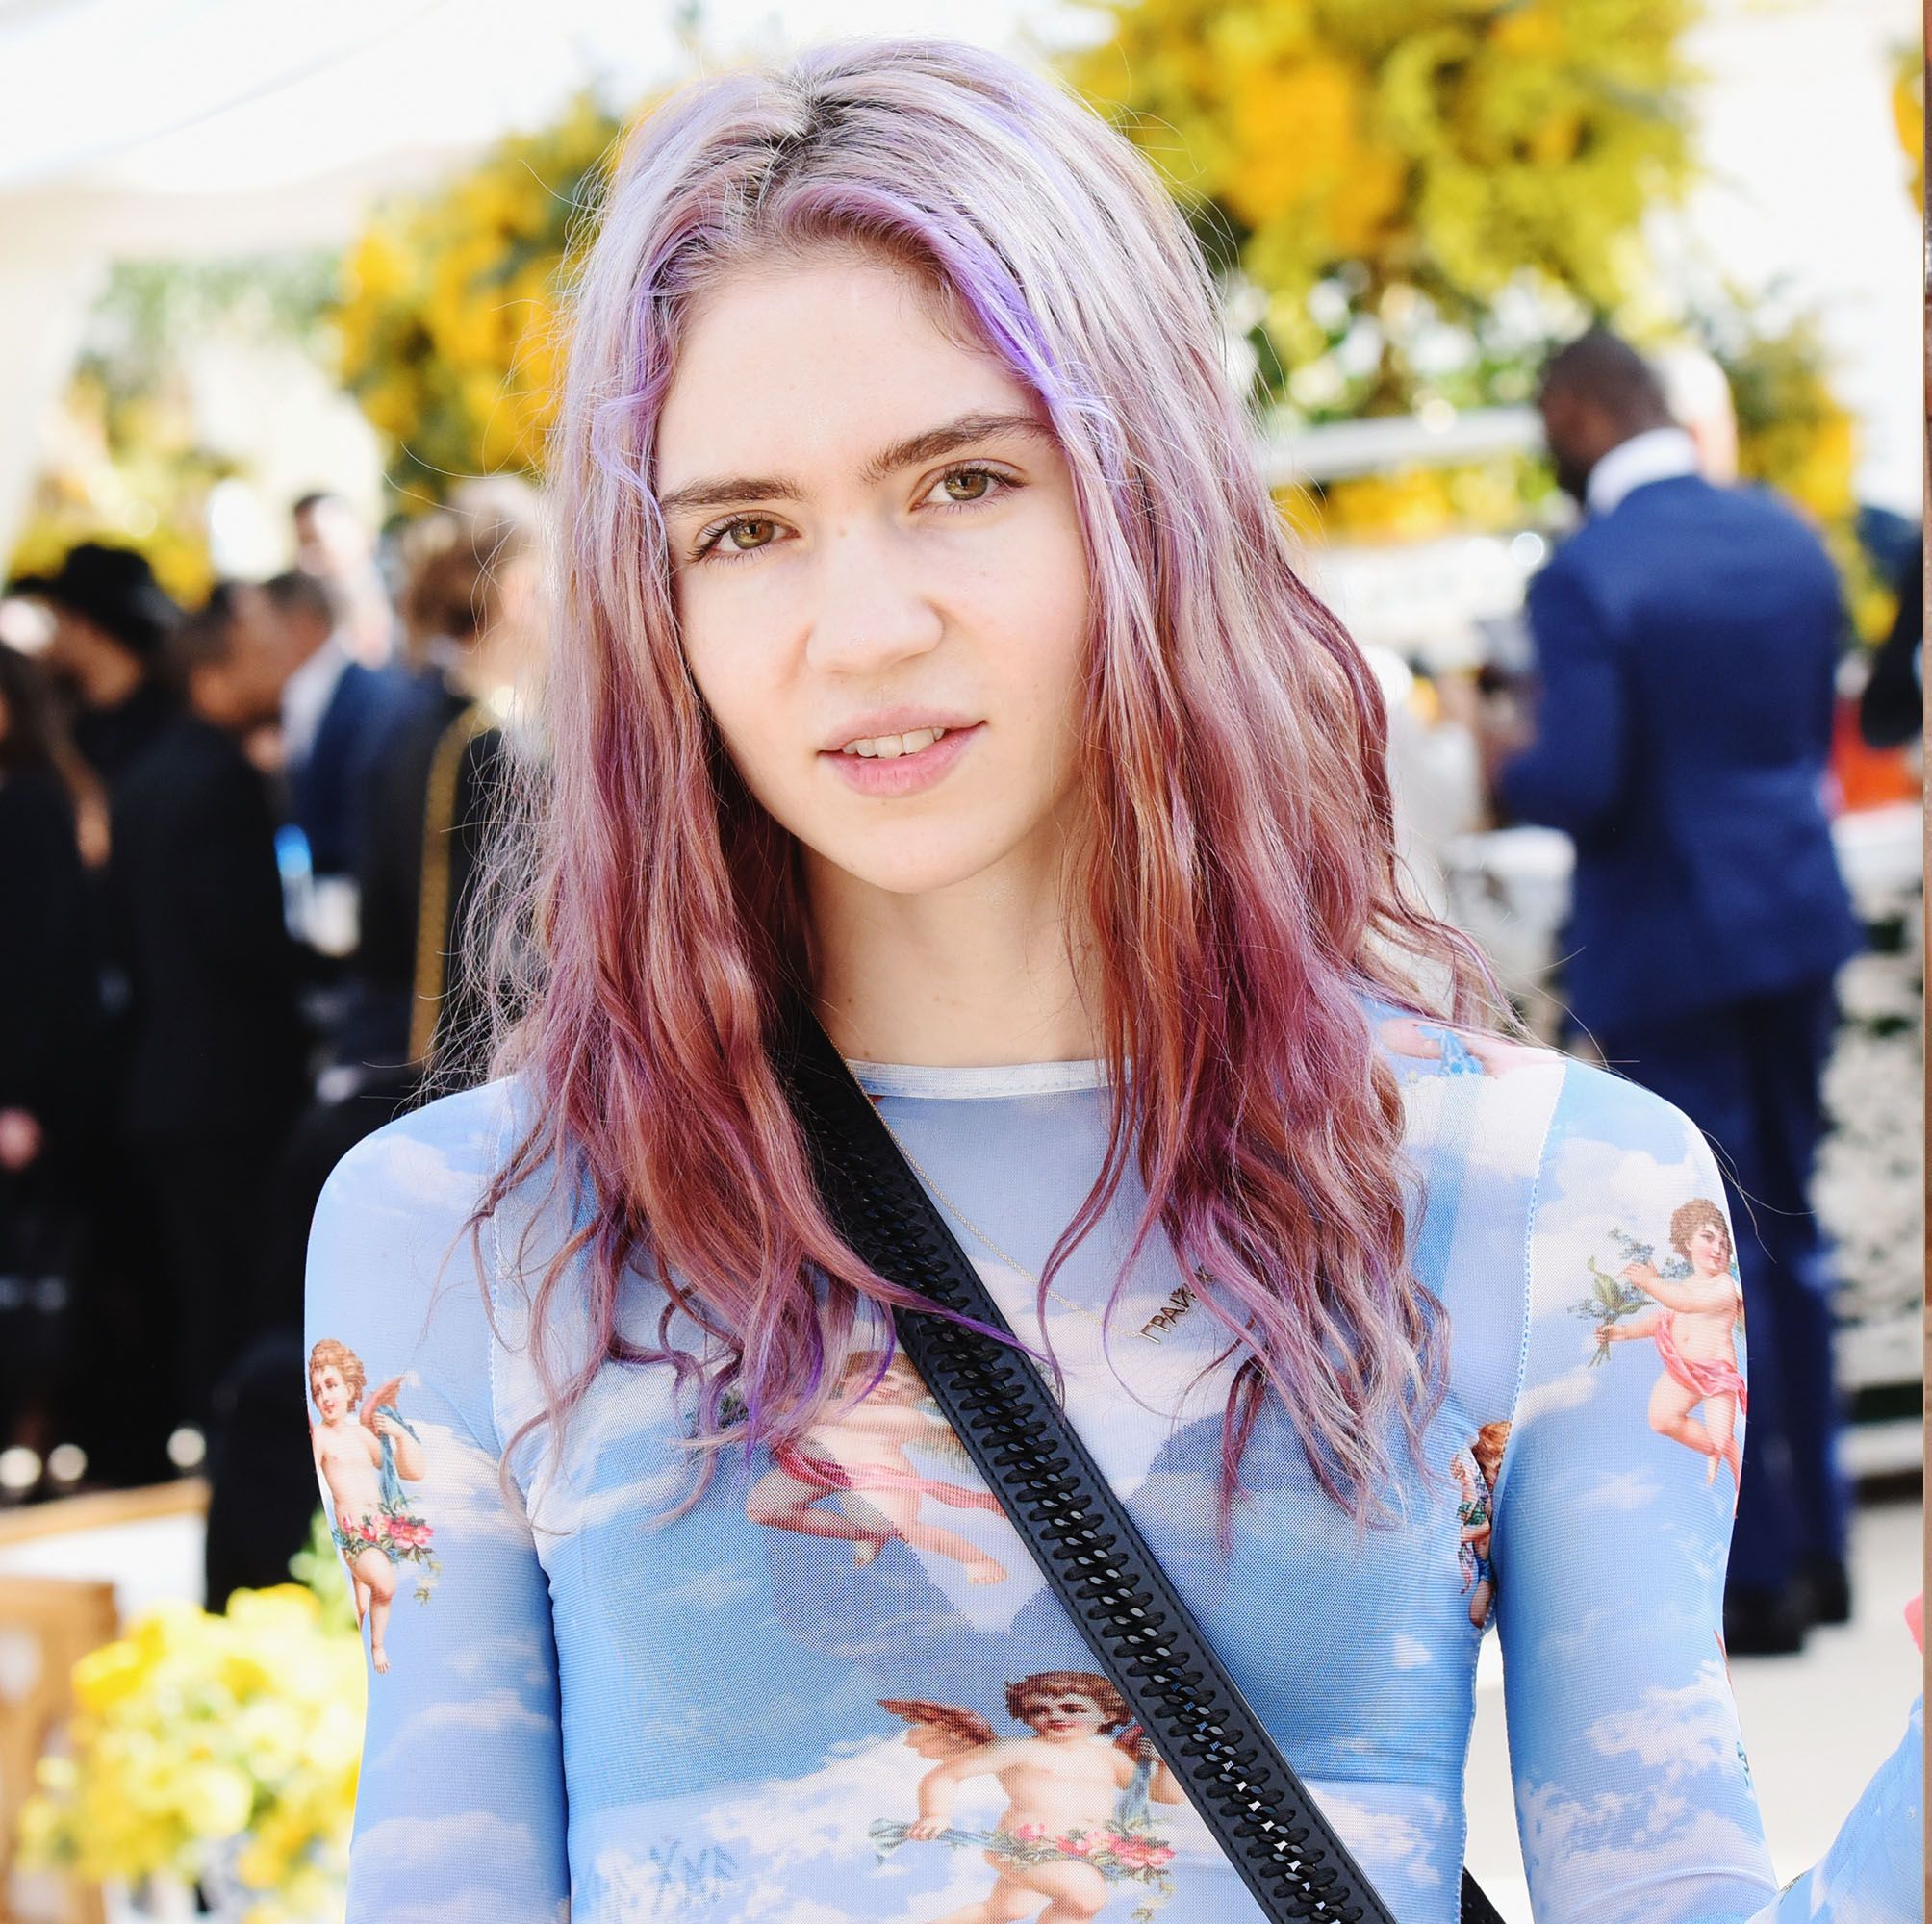 Grimes Is Reportedly Dating Whistleblower Chelsea Manning Following Split from Elon Musk